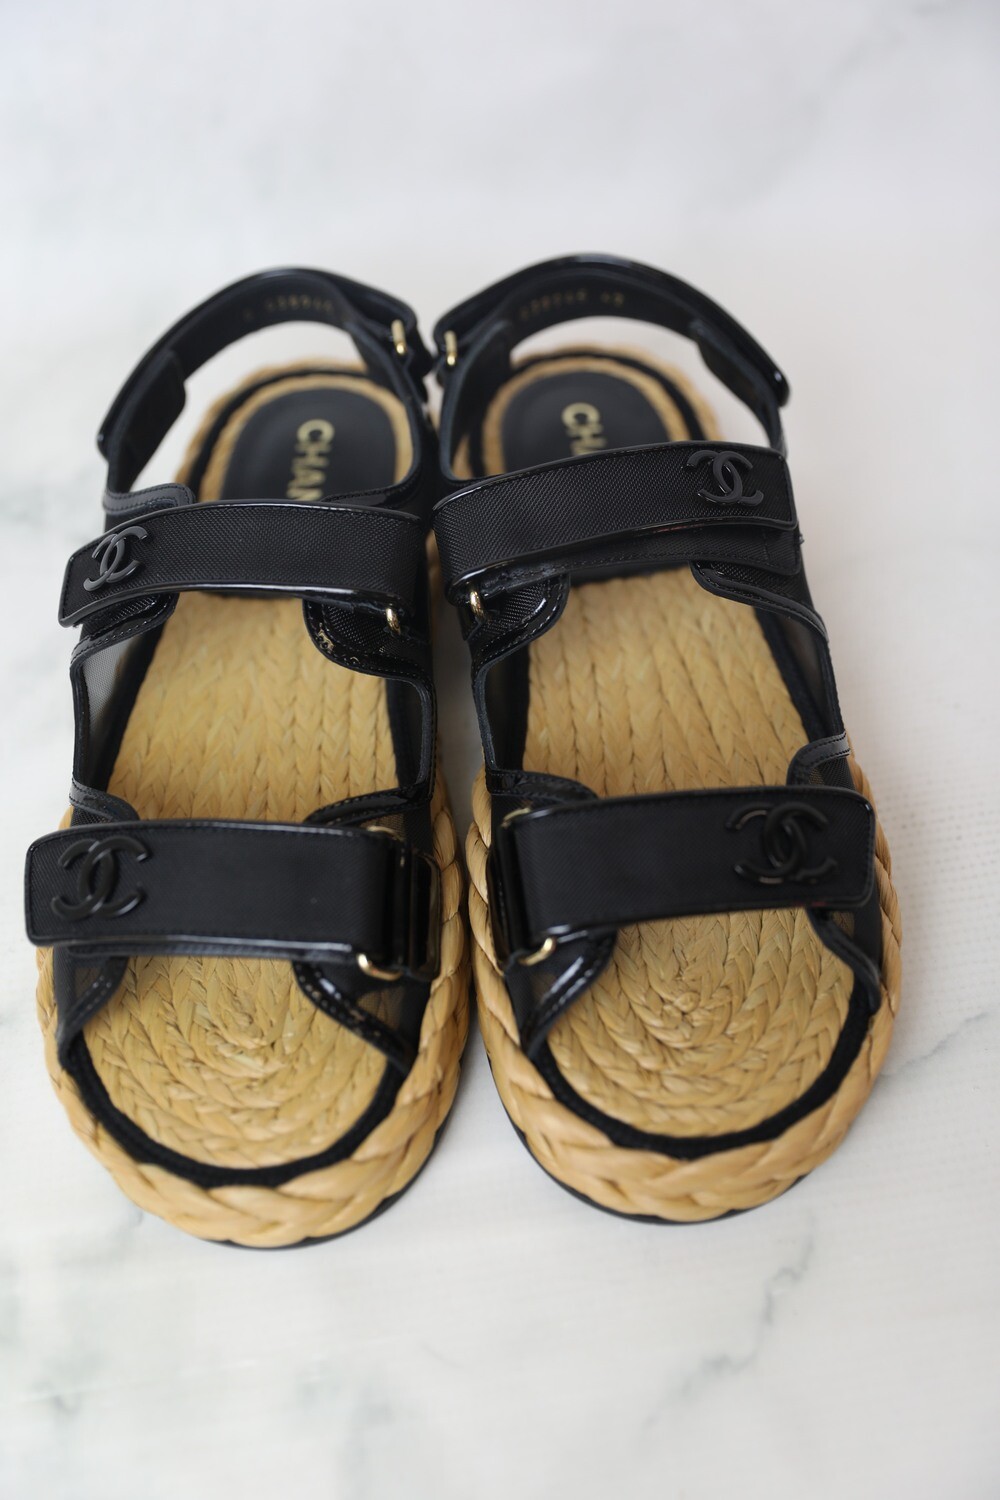 Chanel Gate 5 Dad Sandals, Black Mesh with Patent Trim and Braided